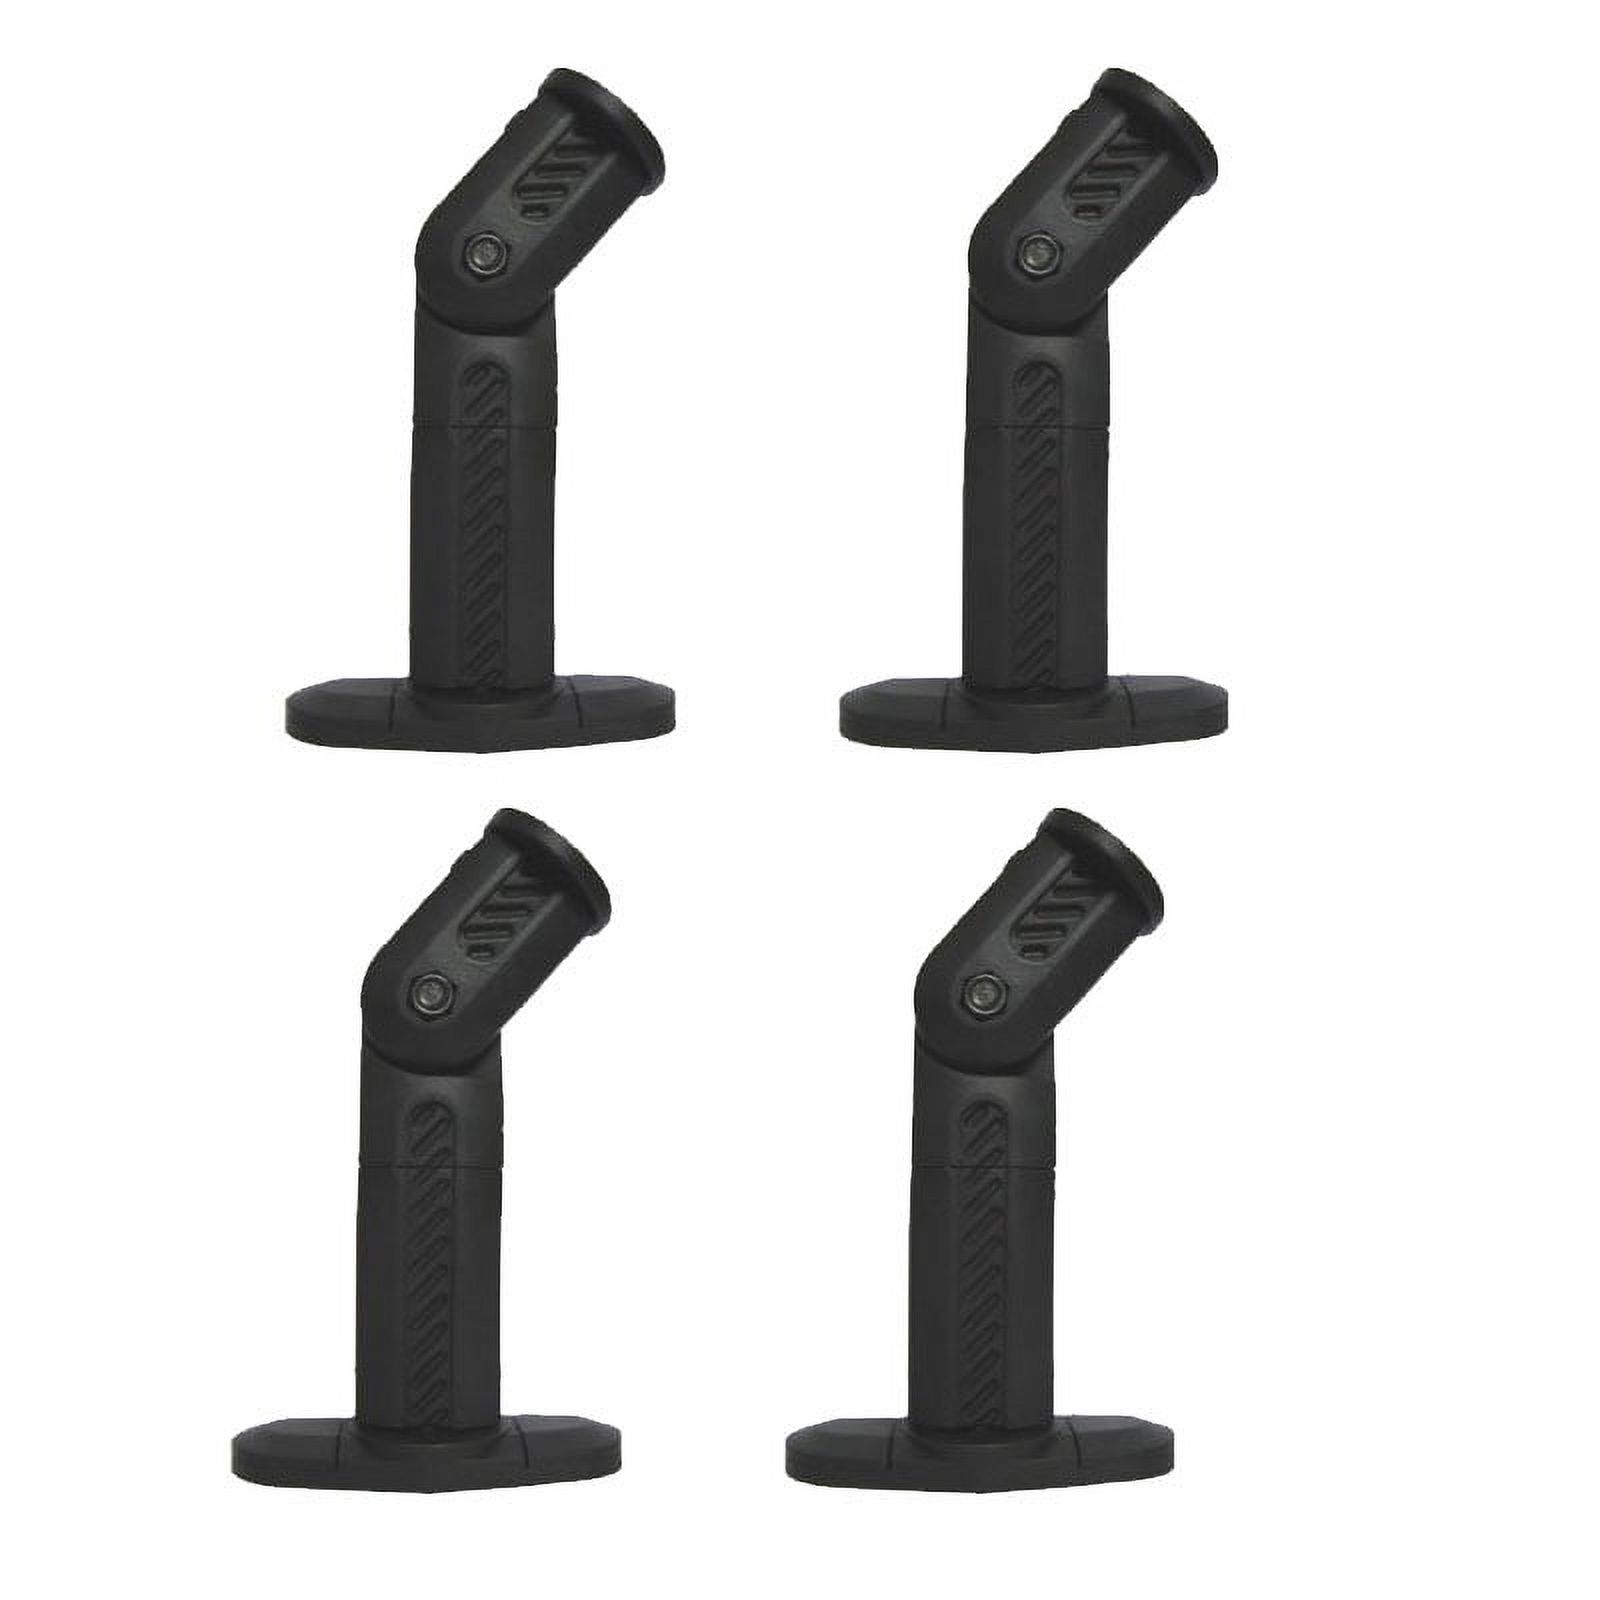 VideoSecu 4 Packs of Wall and Ceiling Speaker Mounts for Home Theater Surround Sound Satellite Speakers Black 1YQ - image 1 of 3